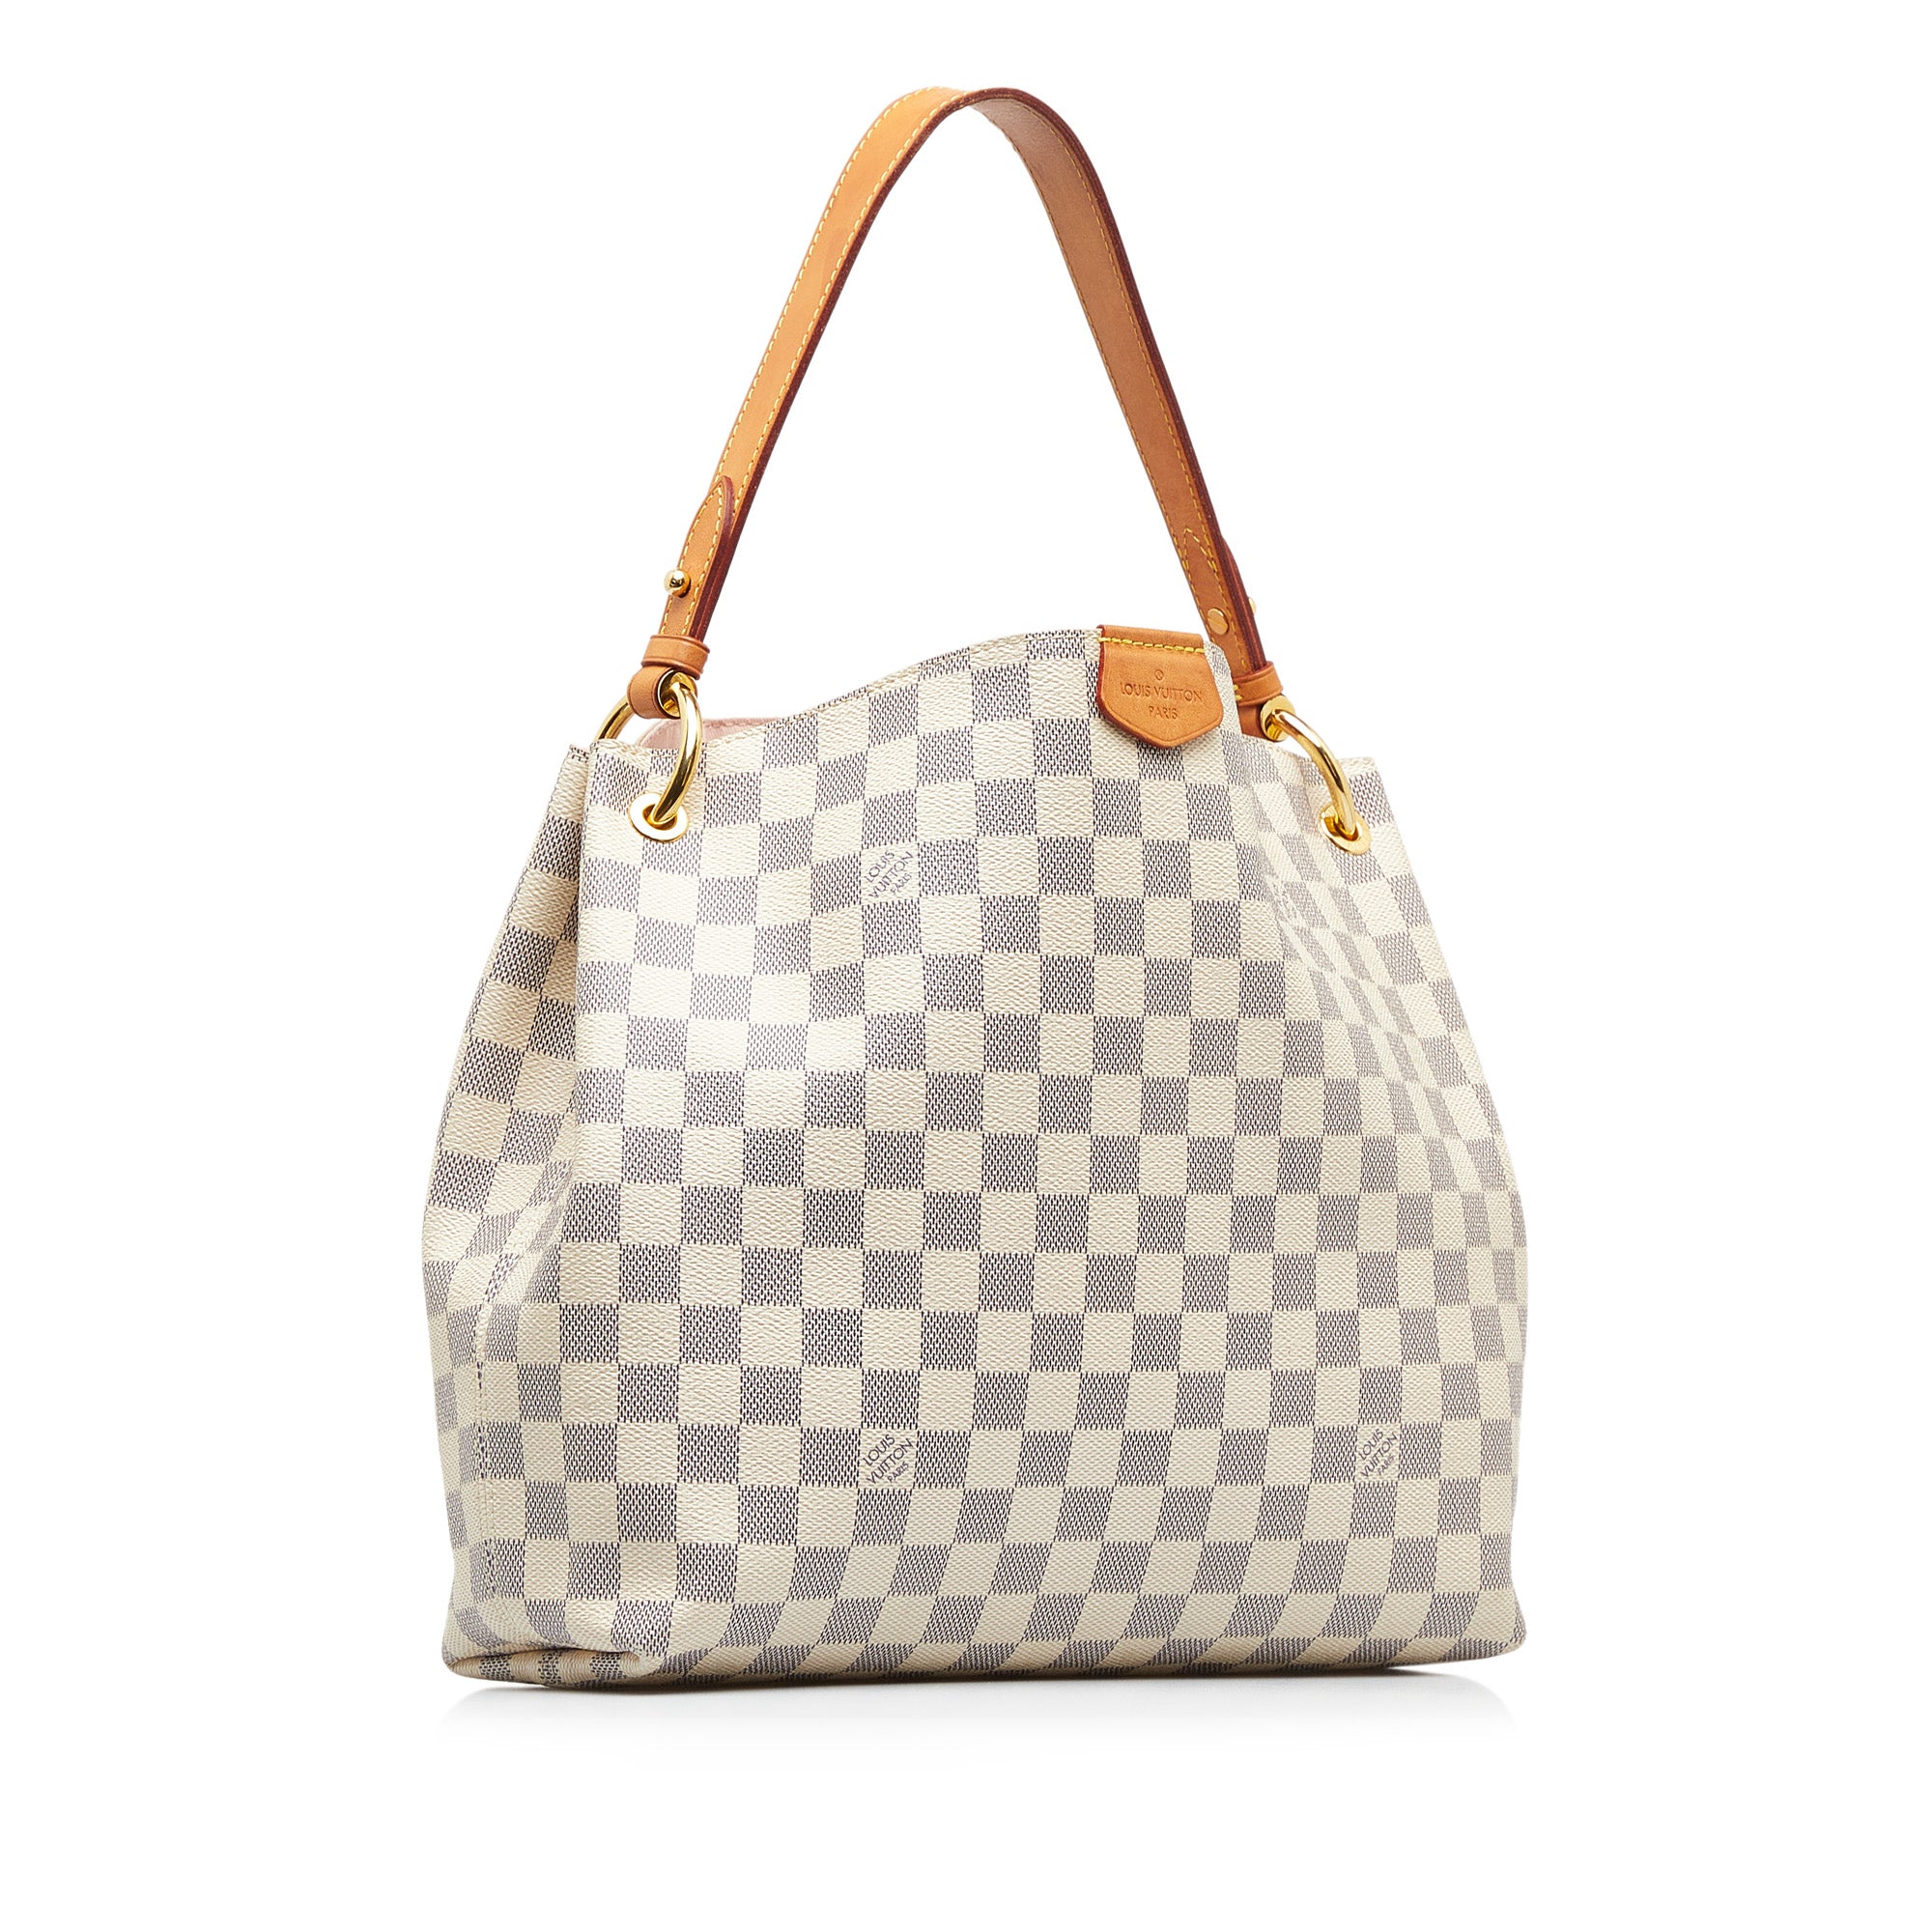 Louie Vuitton Graceful PM - clothing & accessories - by owner